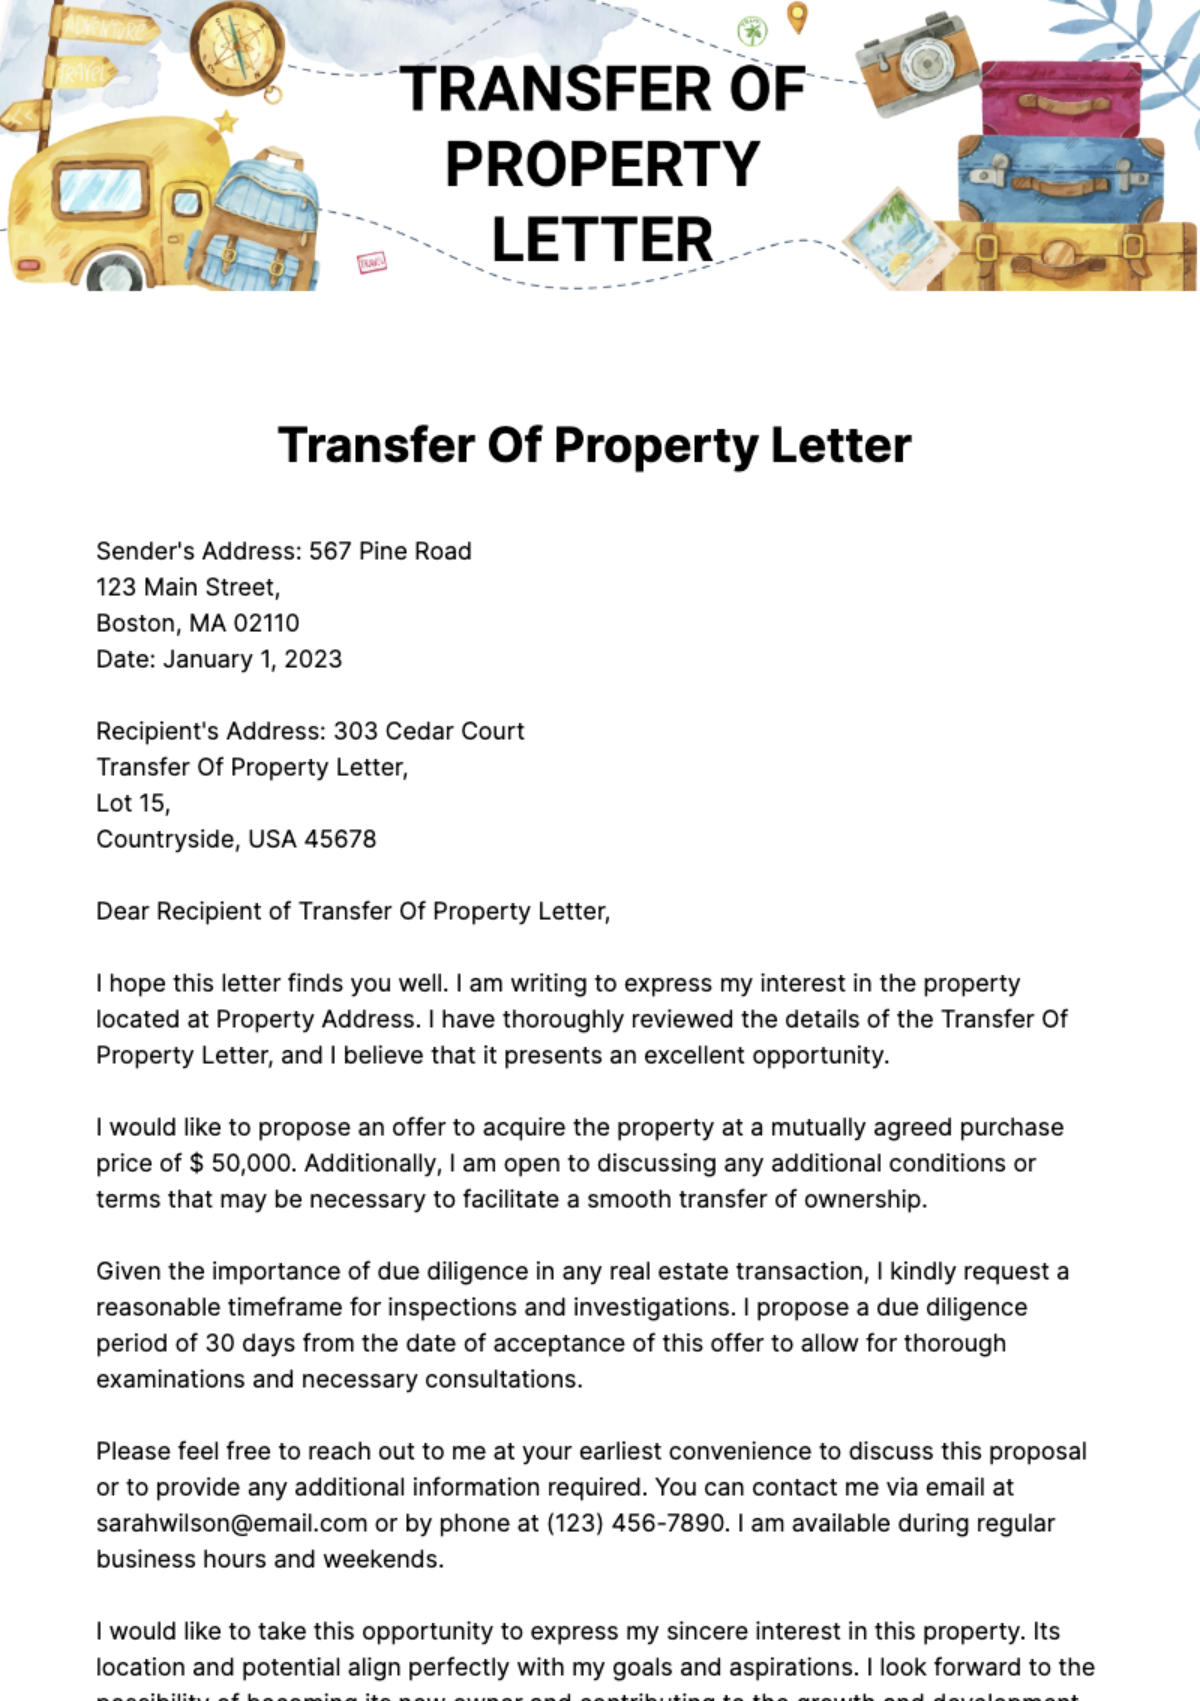 Free Transfer Of Property Letter Template